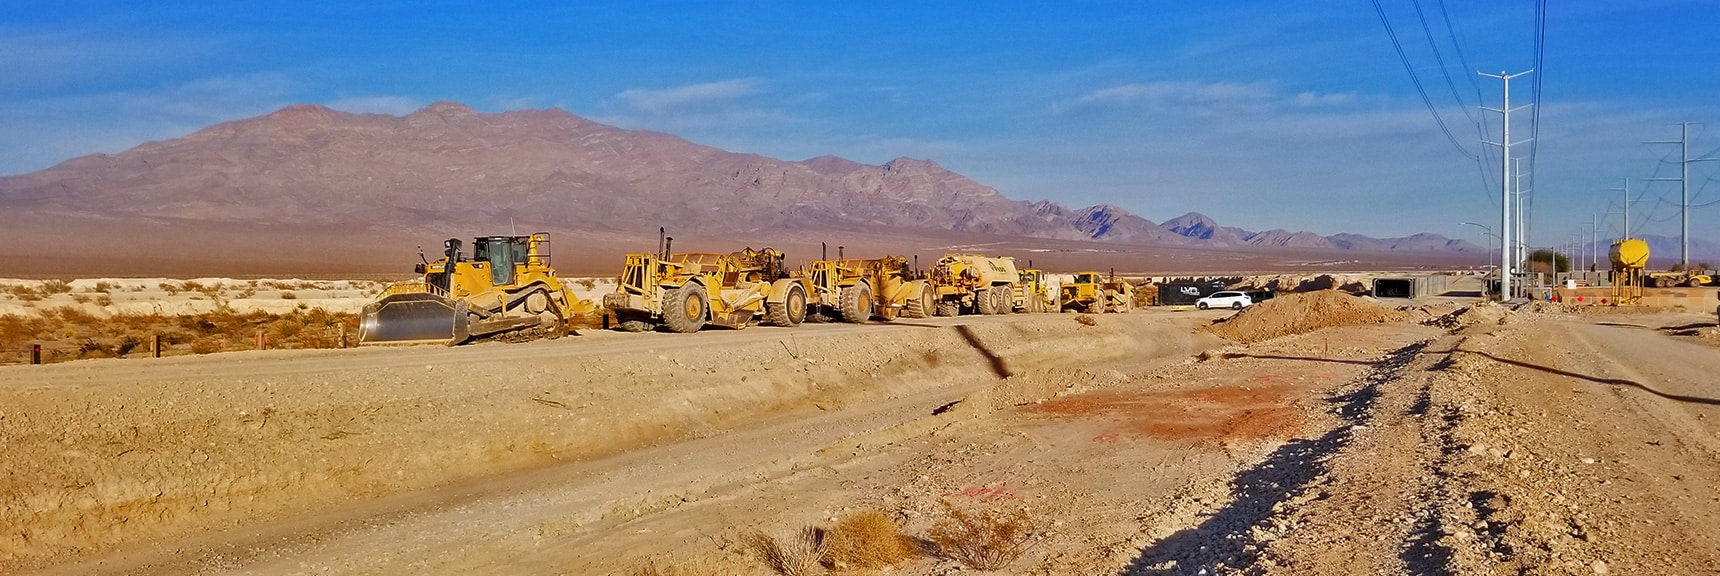 Construction on Moccasin At the Tule Springs Fossil Beds Area. Gass Peak in Background | Snapshot of Las Vegas Northern Growth Edge on January 3, 2021